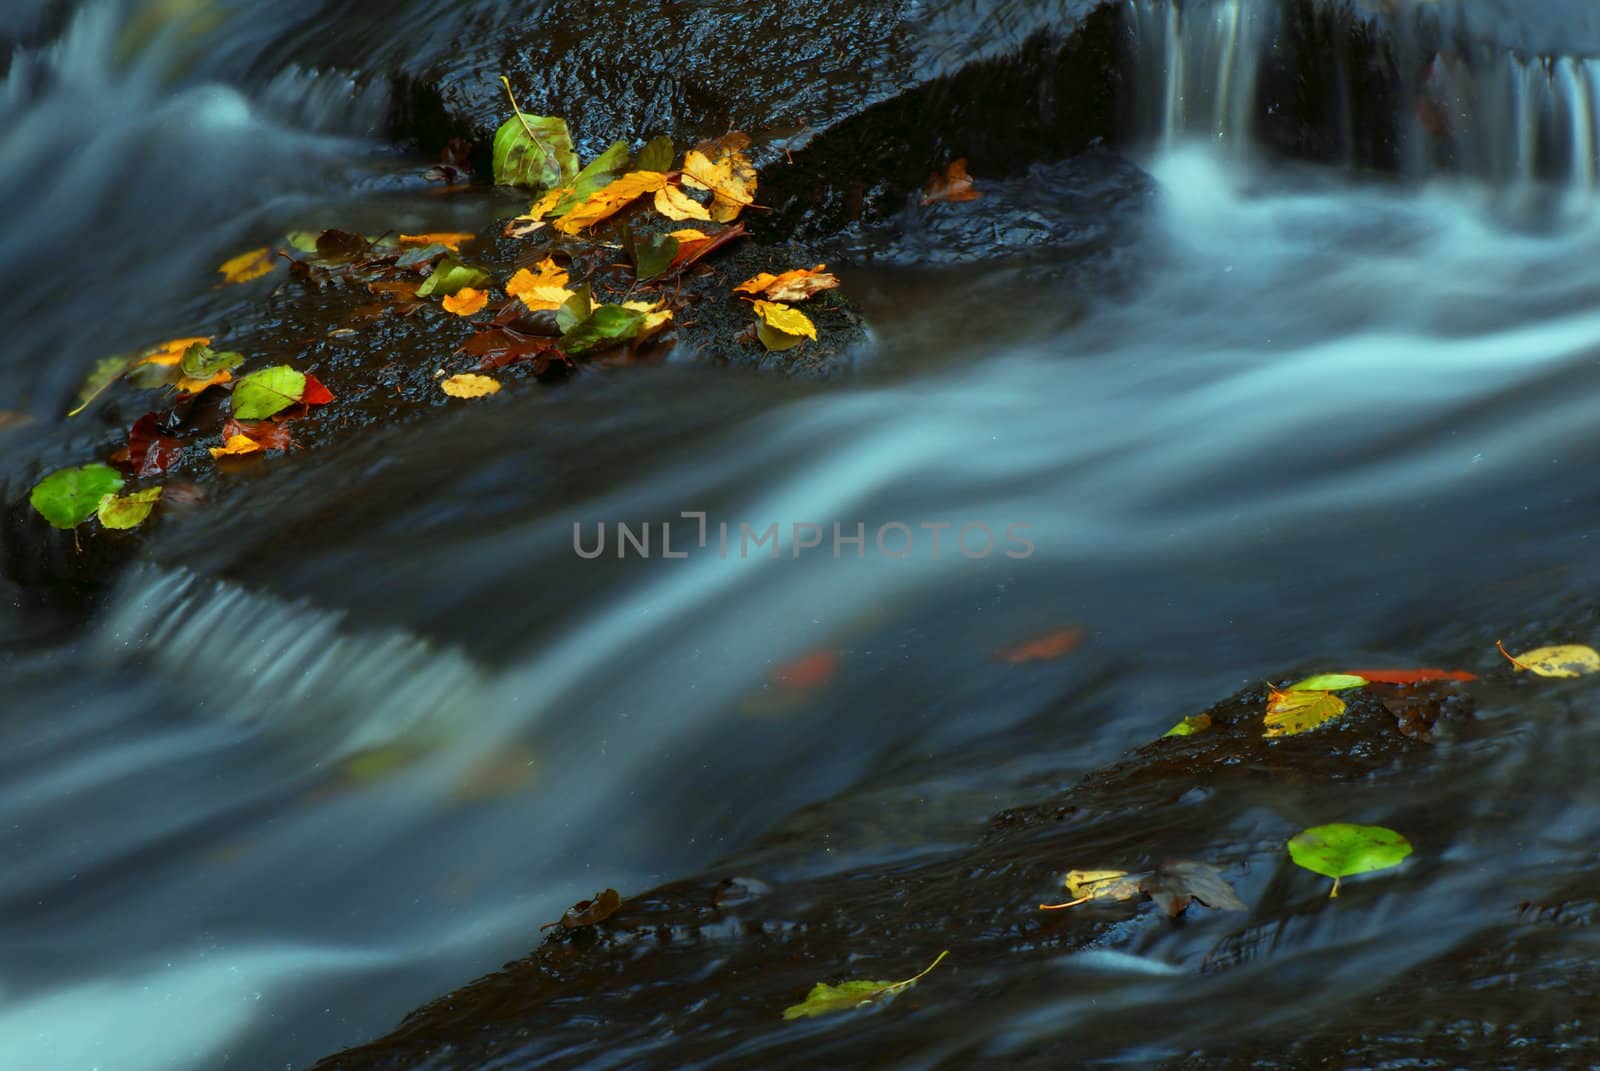 Mountain wood stream in an autumn forest